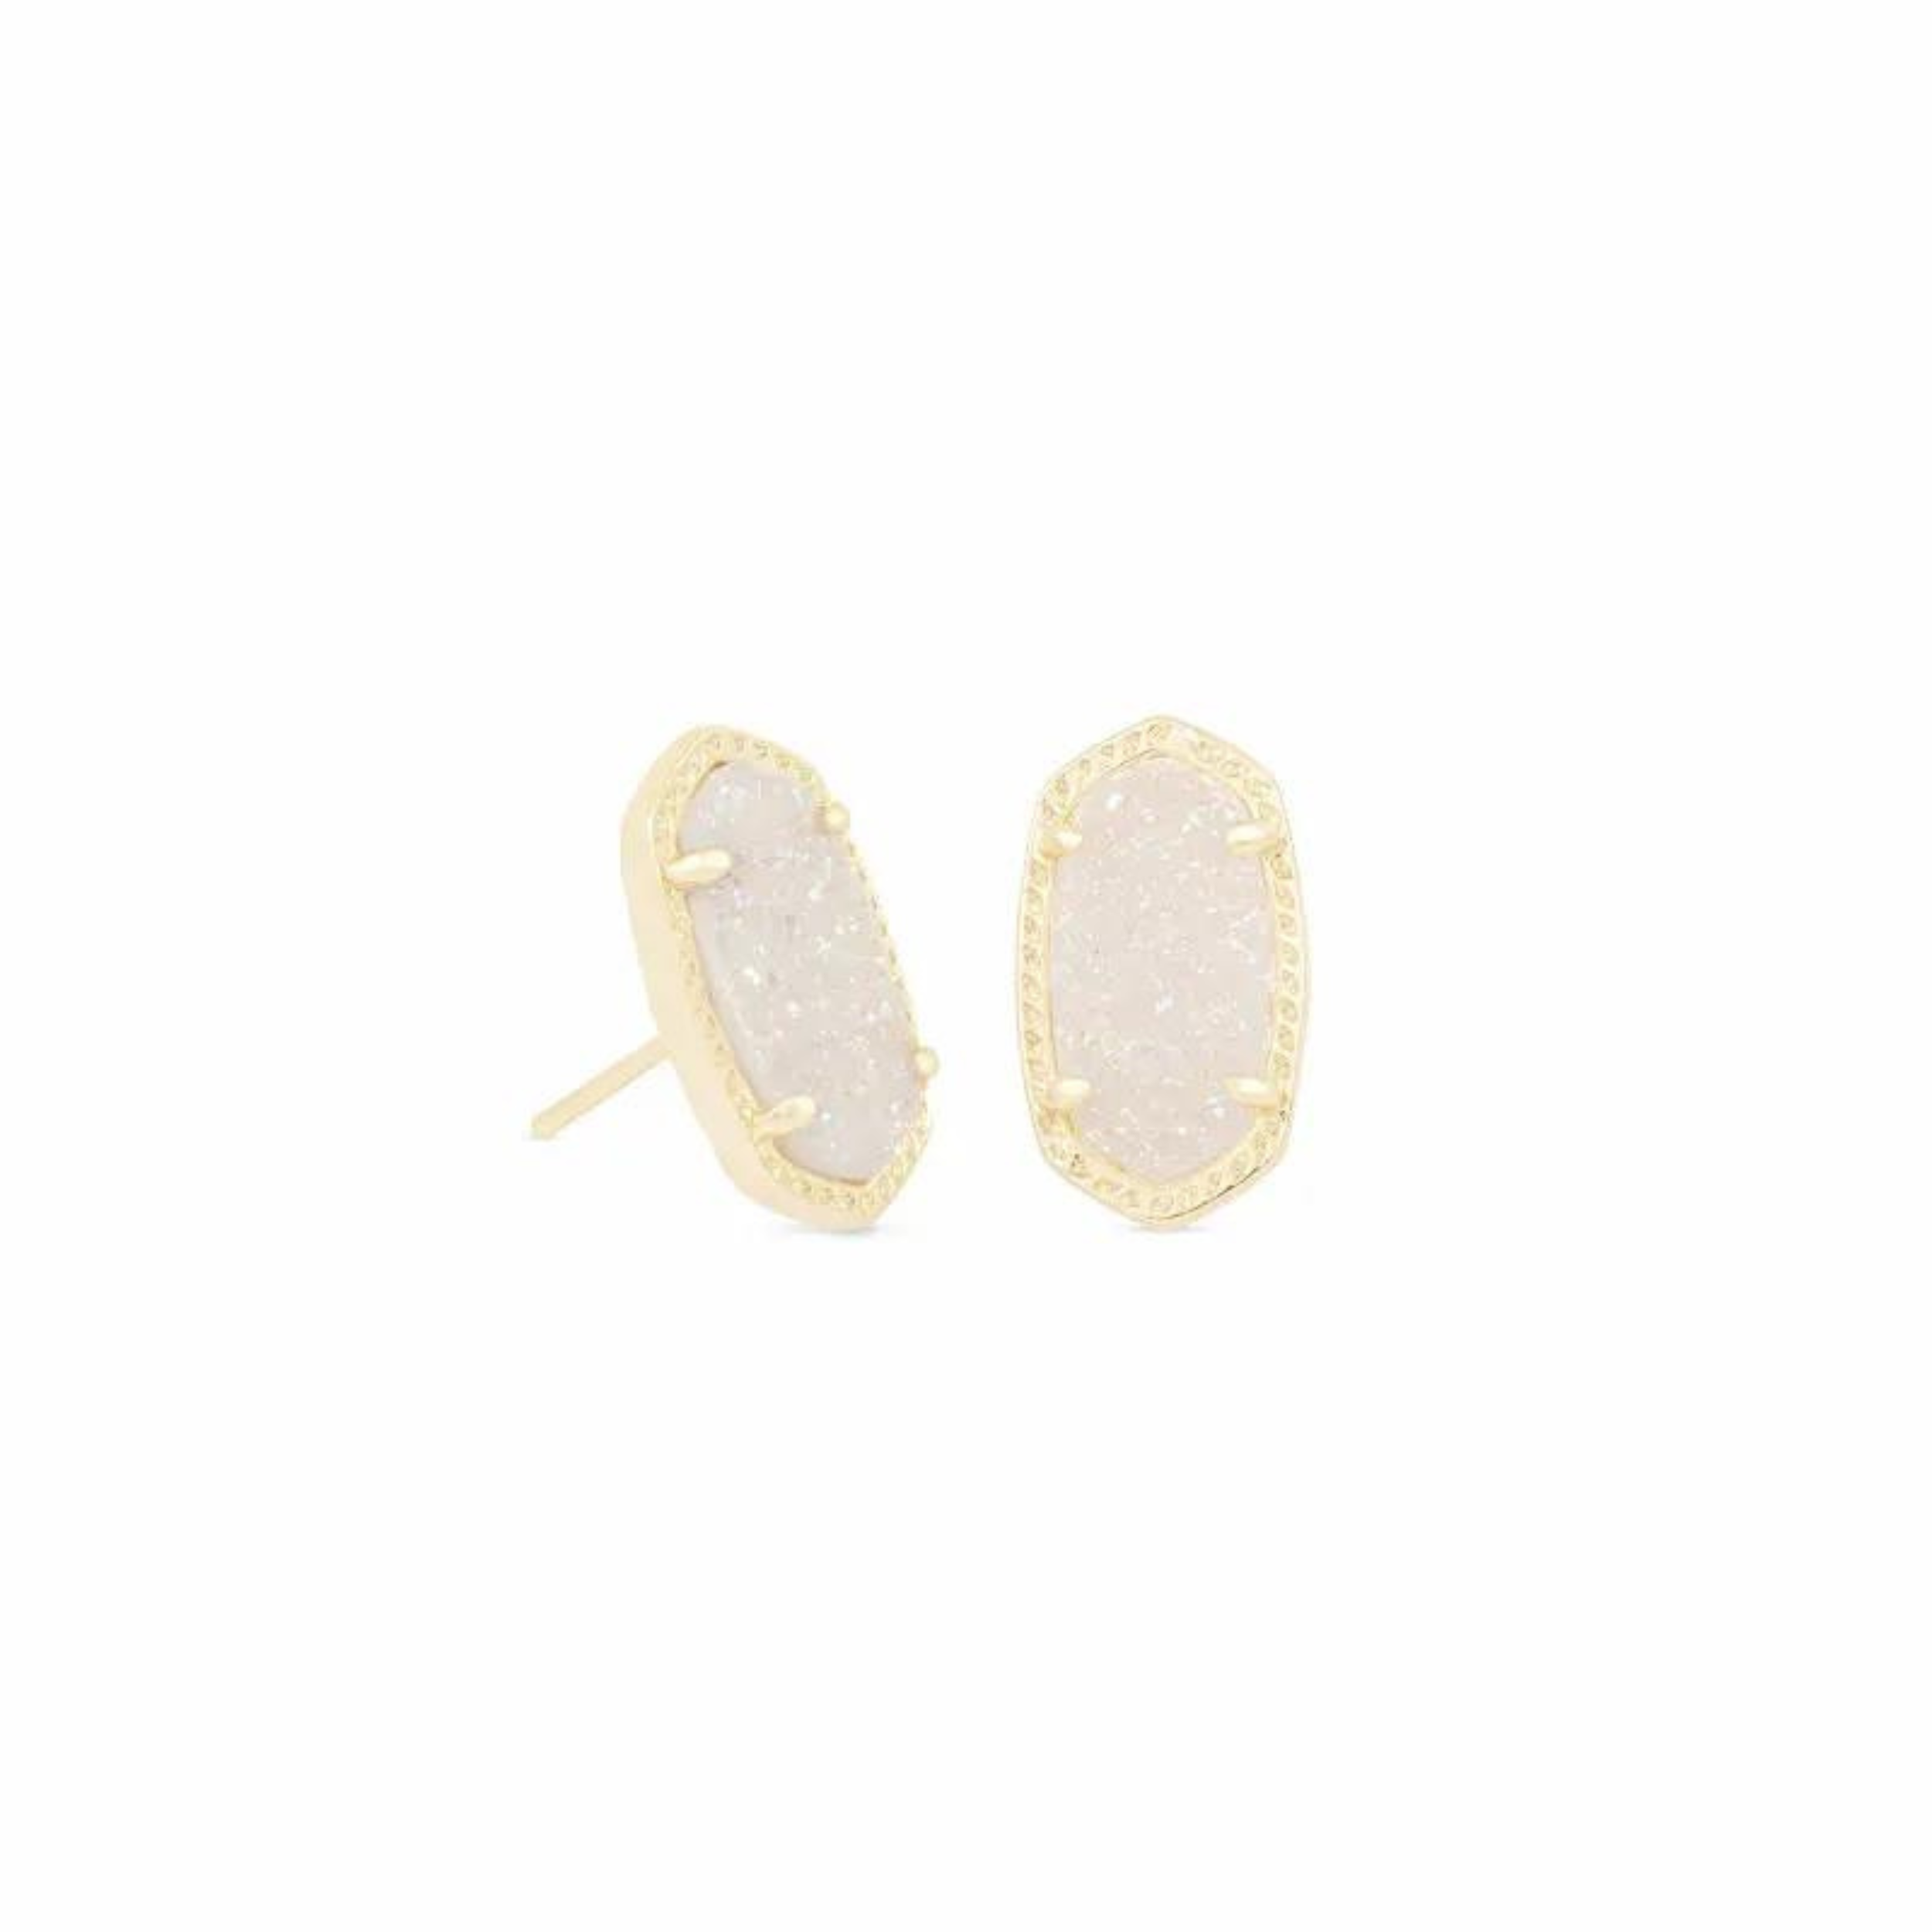 Kendra Scott | Ellie Gold Stud Earrings in Iridescent Drusy - Giddy Up Glamour Boutique